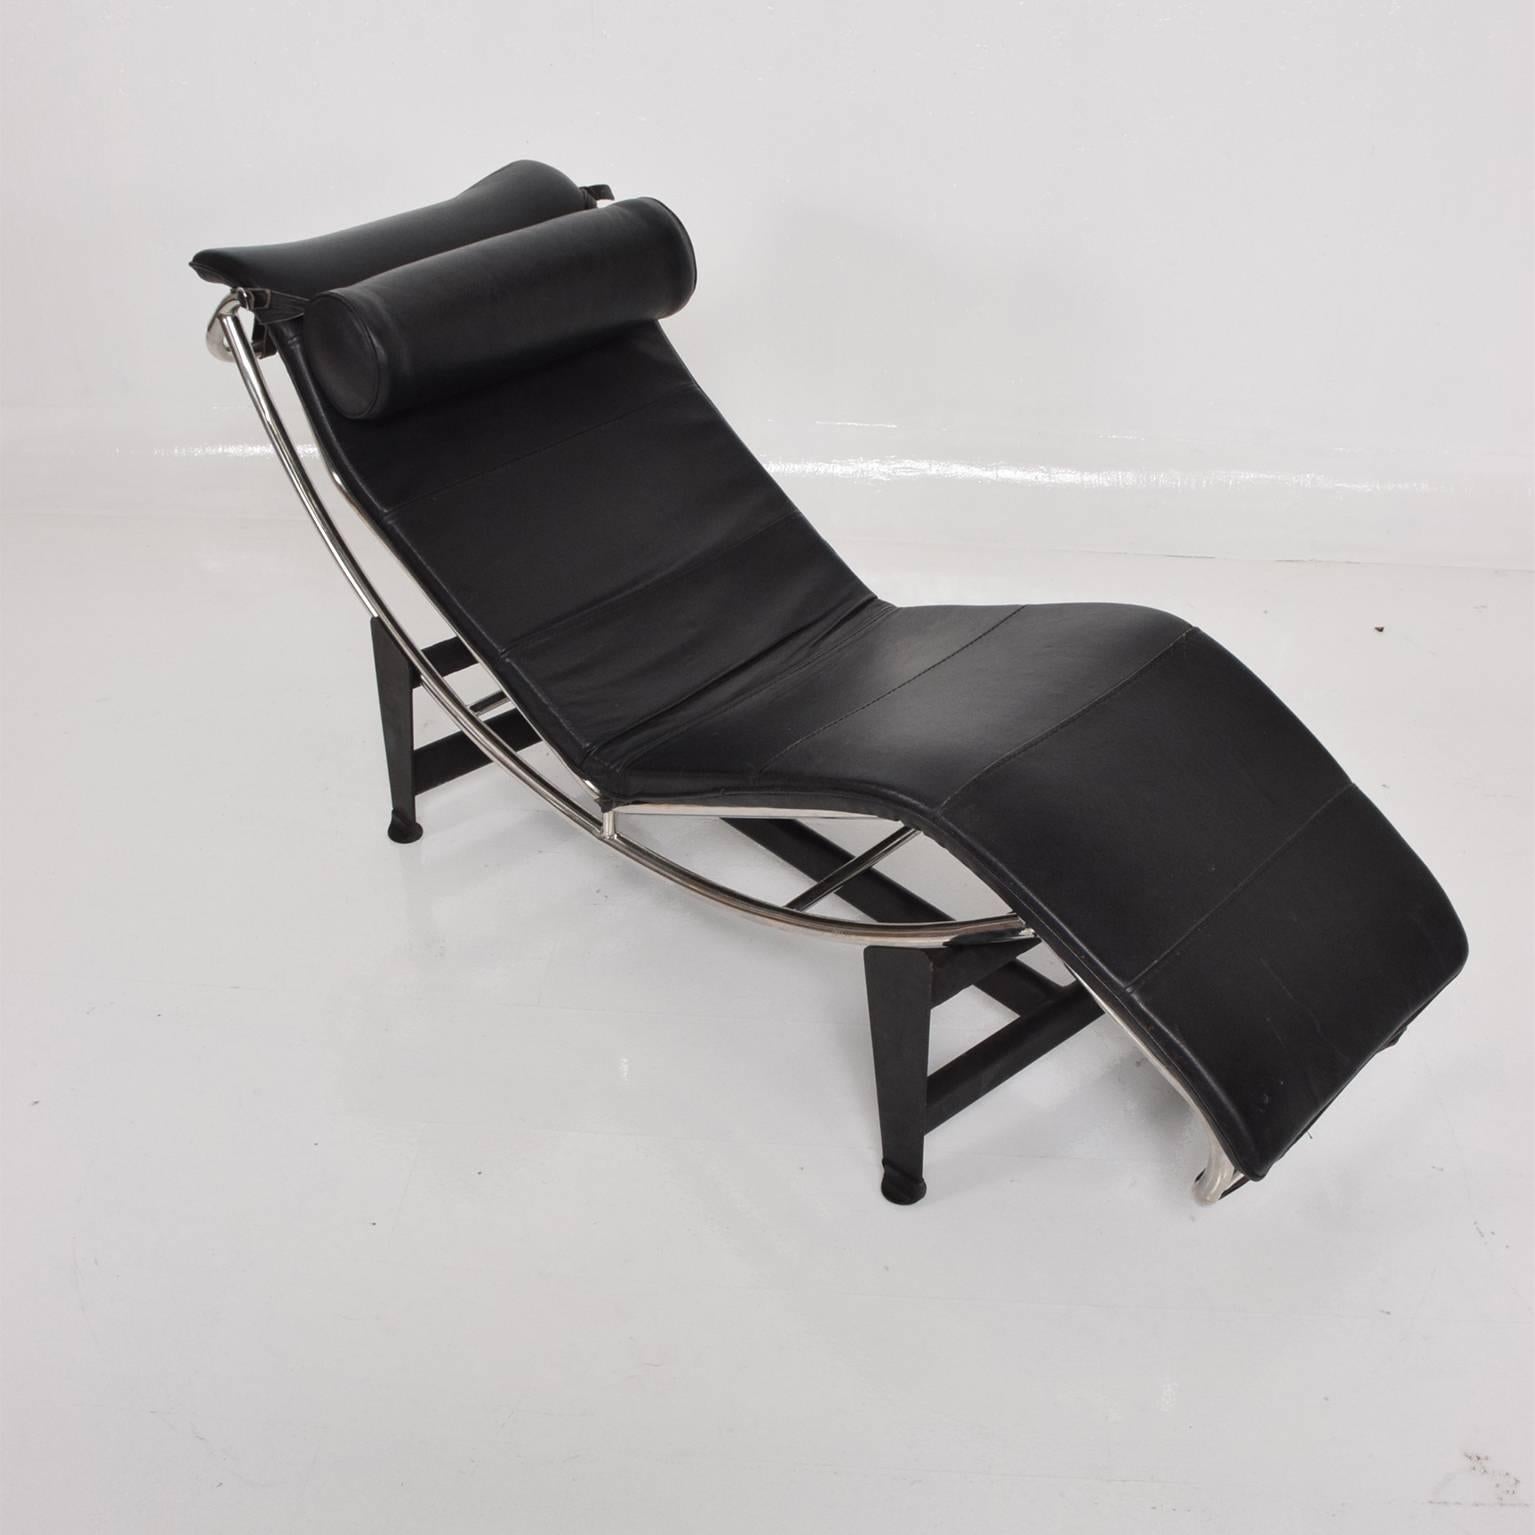 Steel Le Corbusier Lounge Chair Mid-Century Modern Black Leather